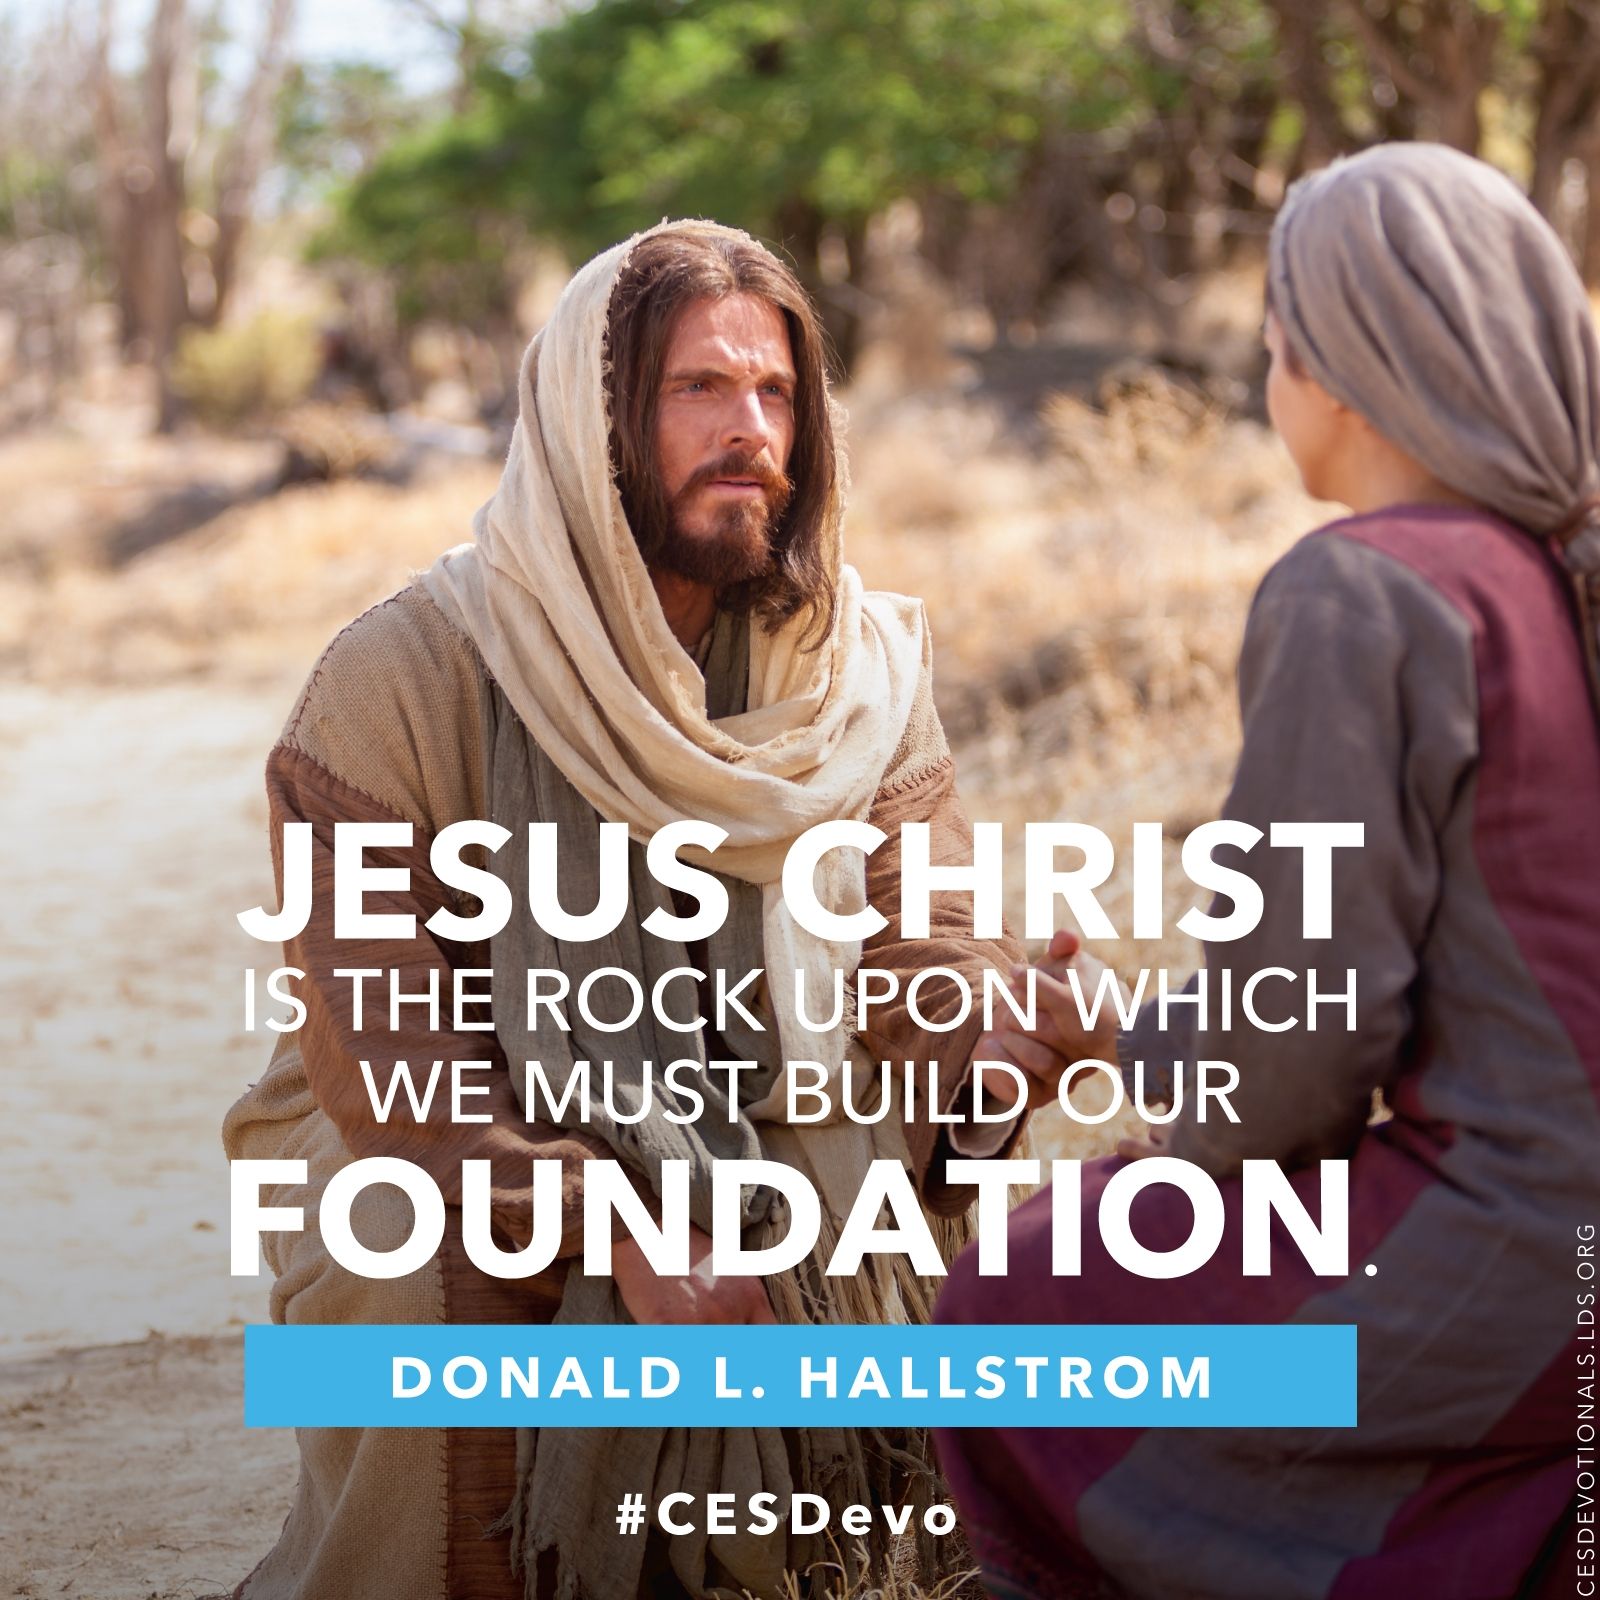 “Jesus Christ is the rock upon which we must build our foundation.”—Elder Donald L. Hallstrom, “How Firm A Foundation” © See Individual Images ipCode 1.